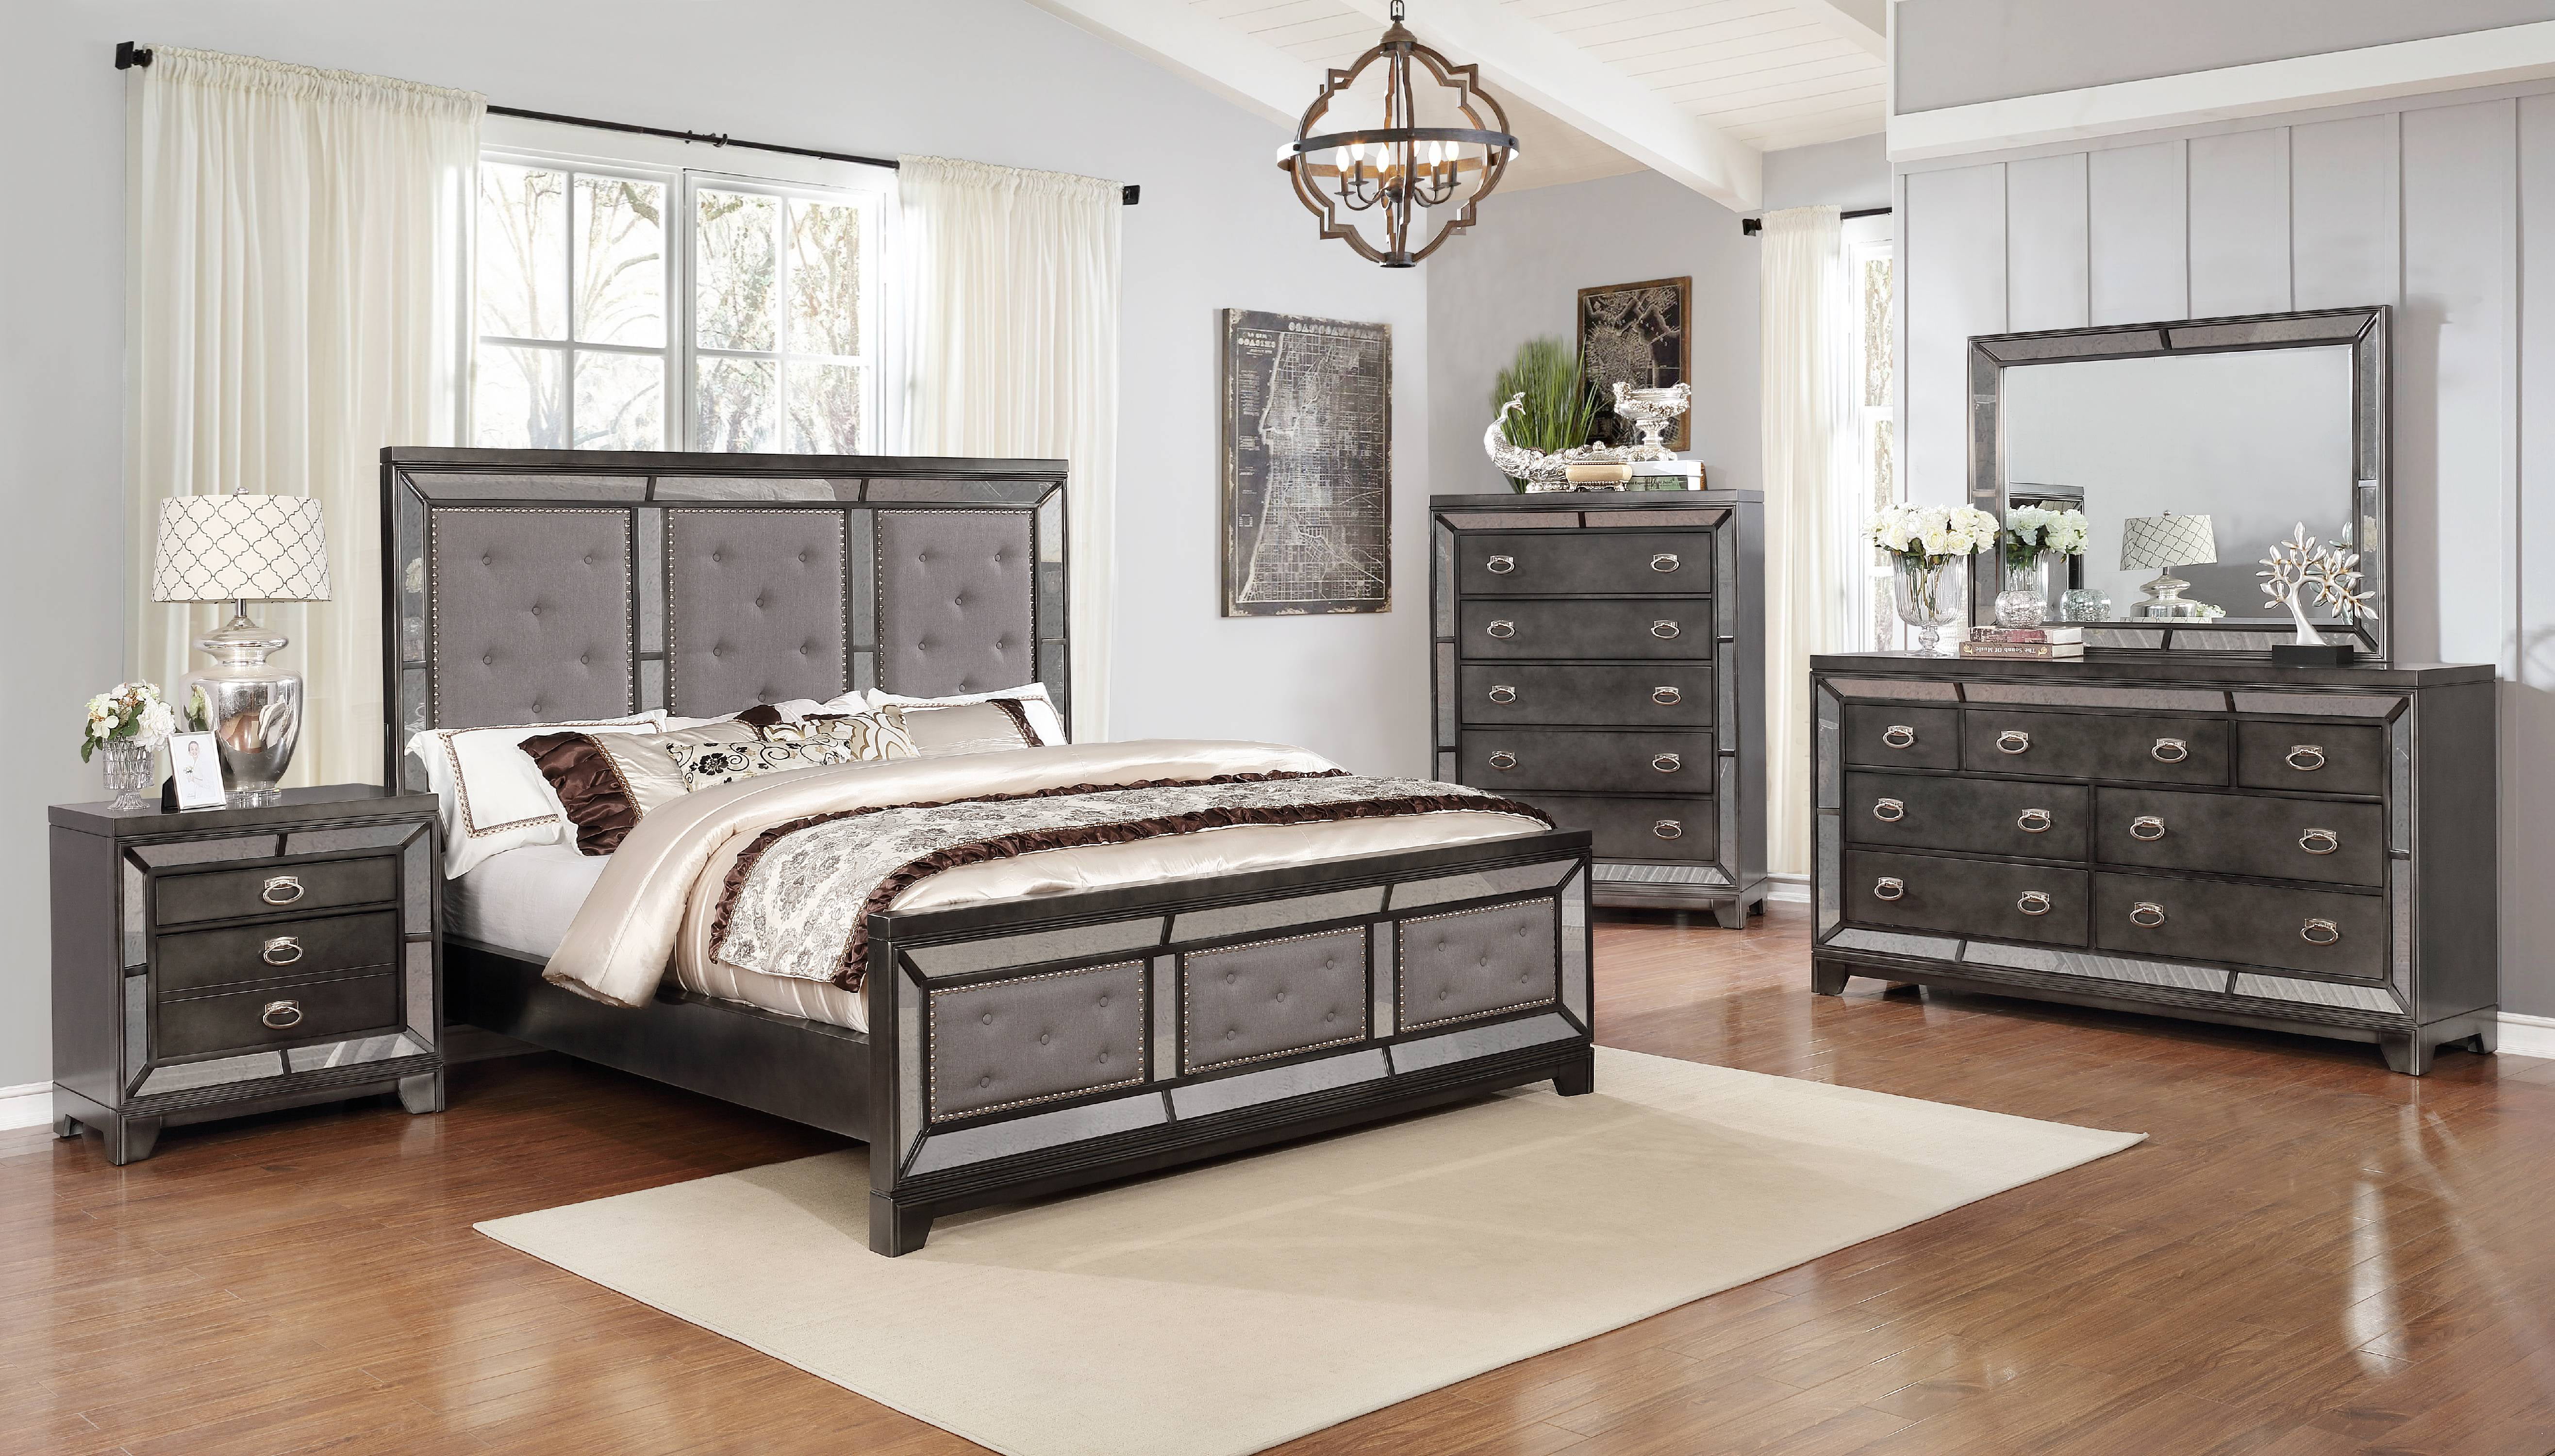 5pc Classic Bedroom set Tufted and Mirror Trimming (Bed, 2